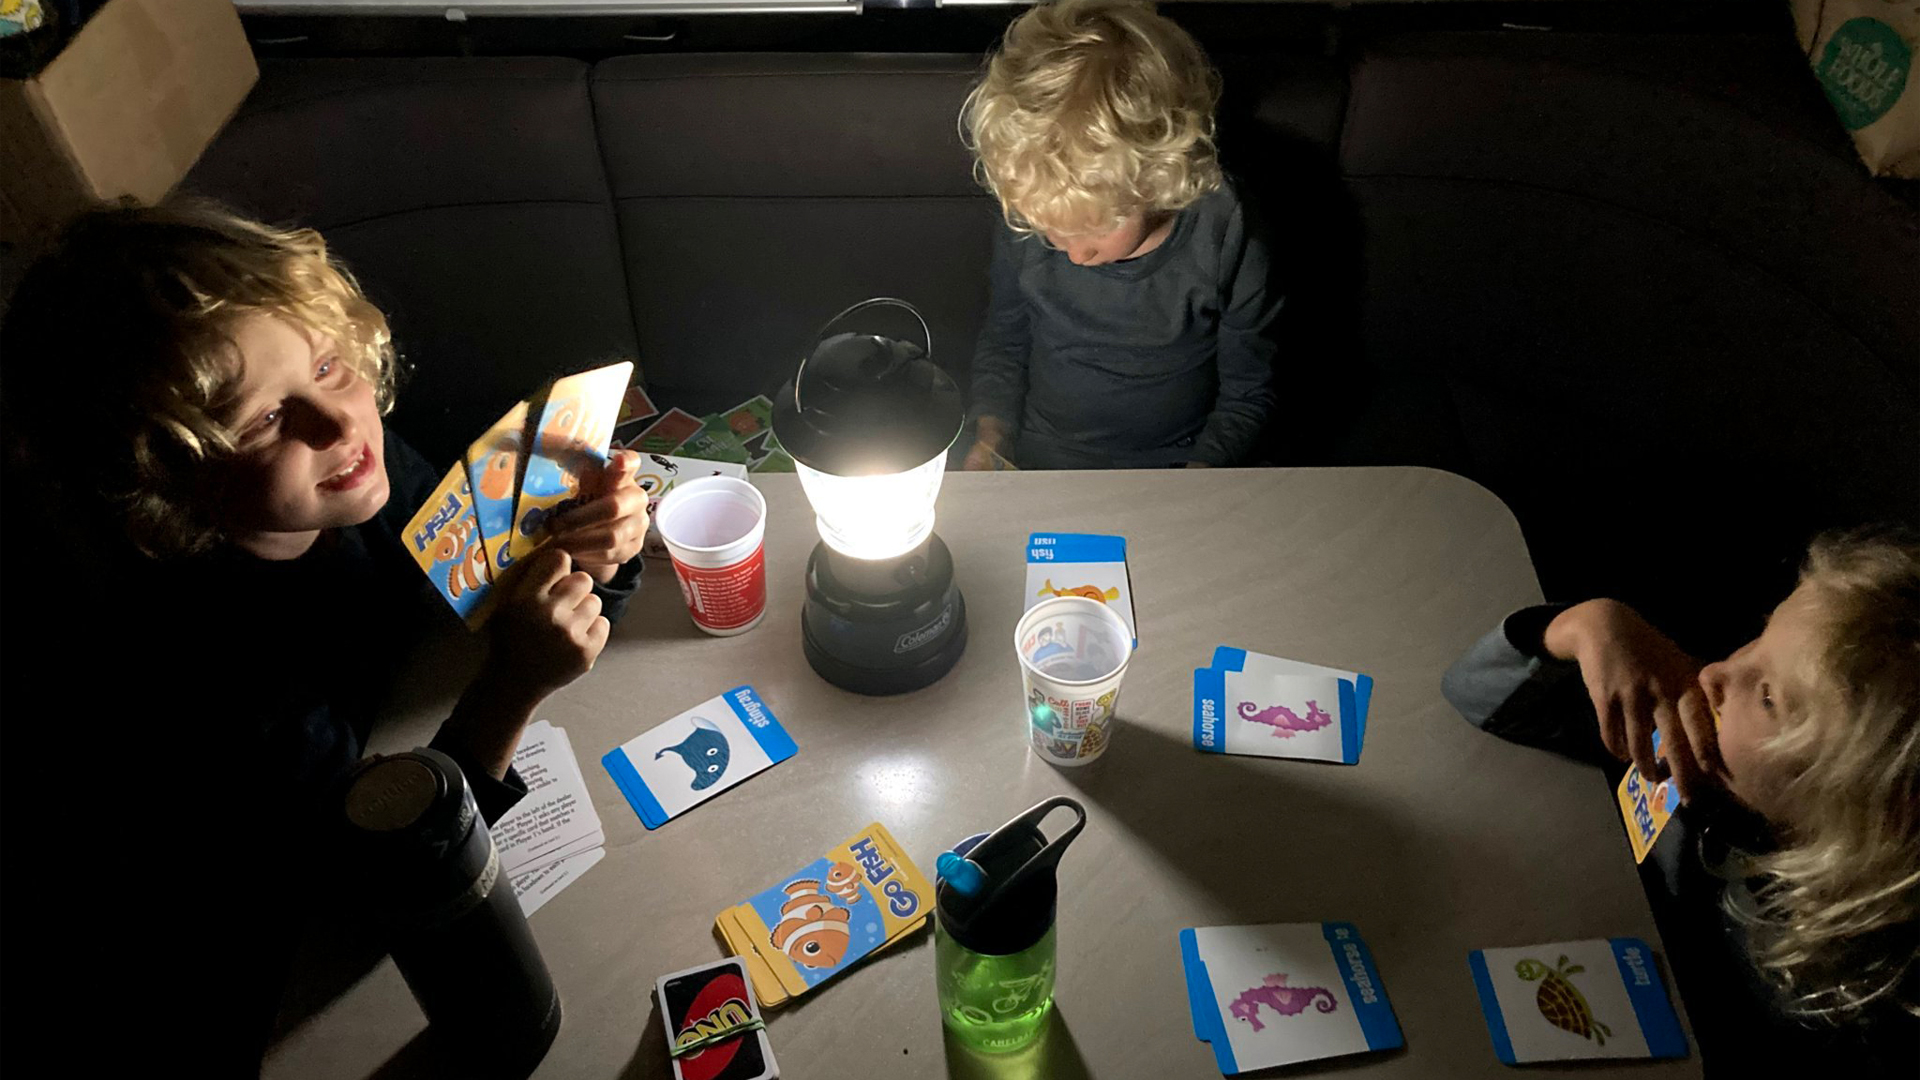 Three kids sitting at the table in their Airstream travel trailer playing go fish at night with a night light turned on.